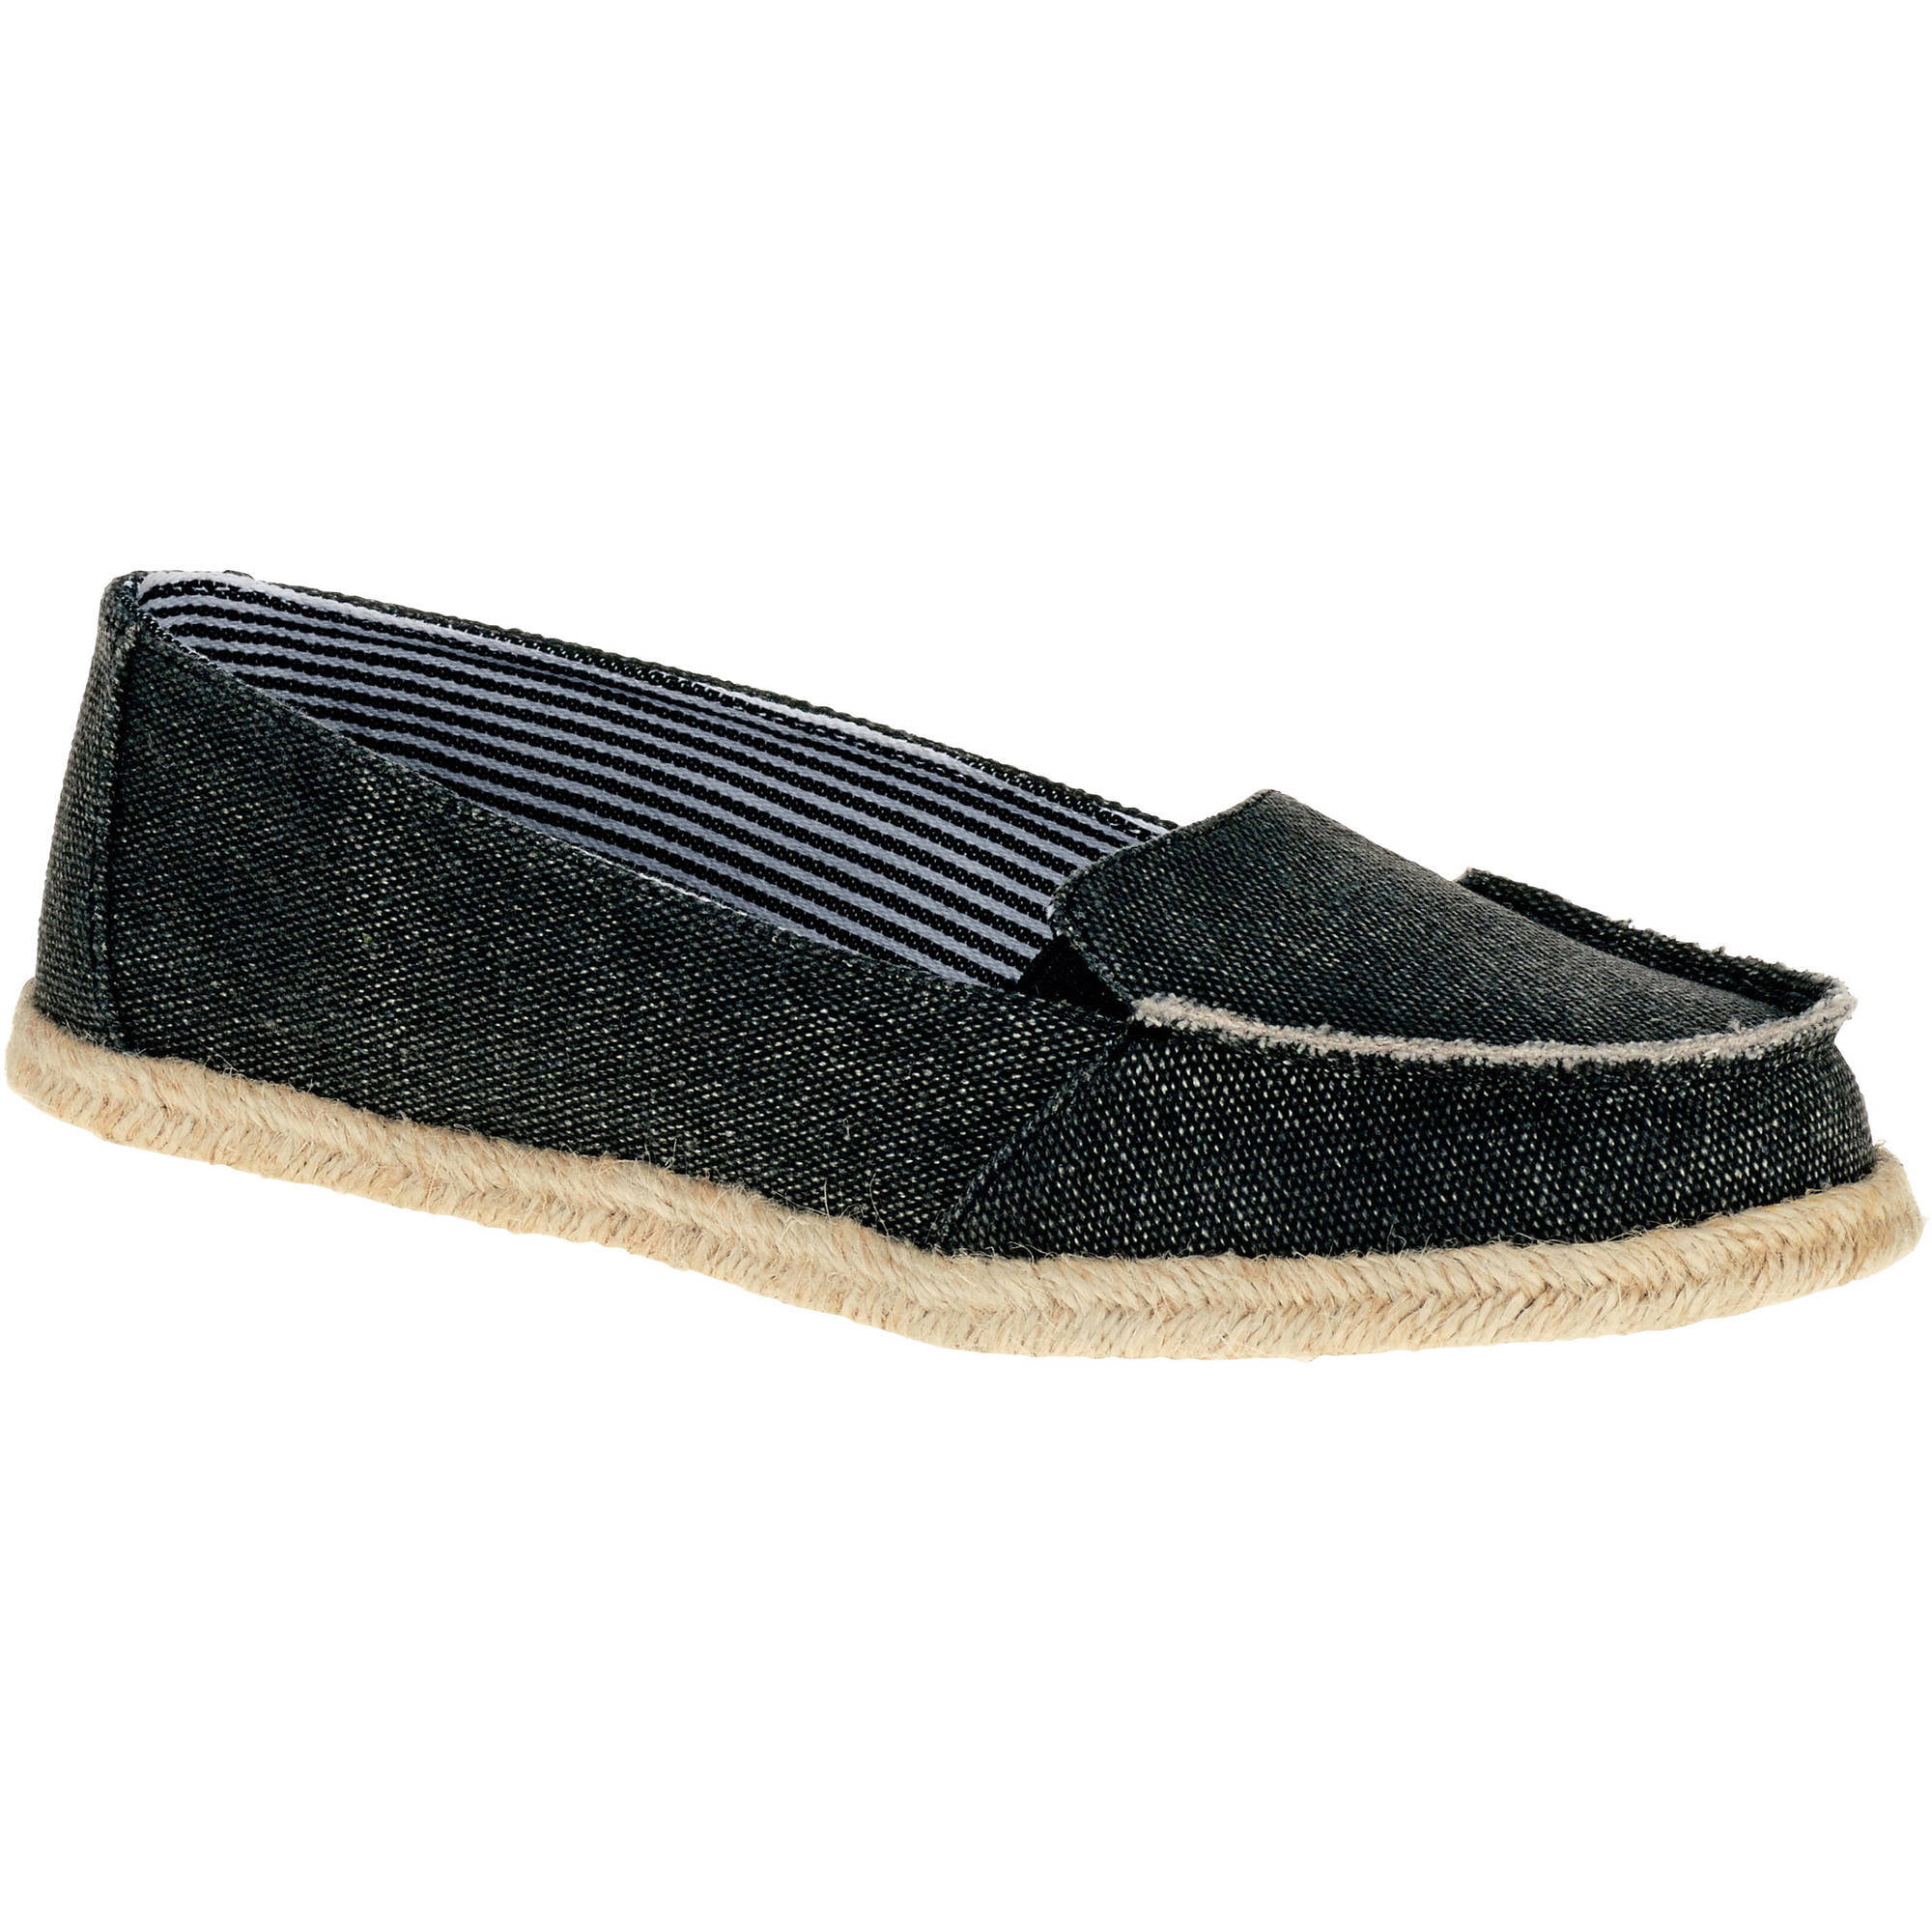 Faded Glory Women's Surfer Moccassin Casual Shoe